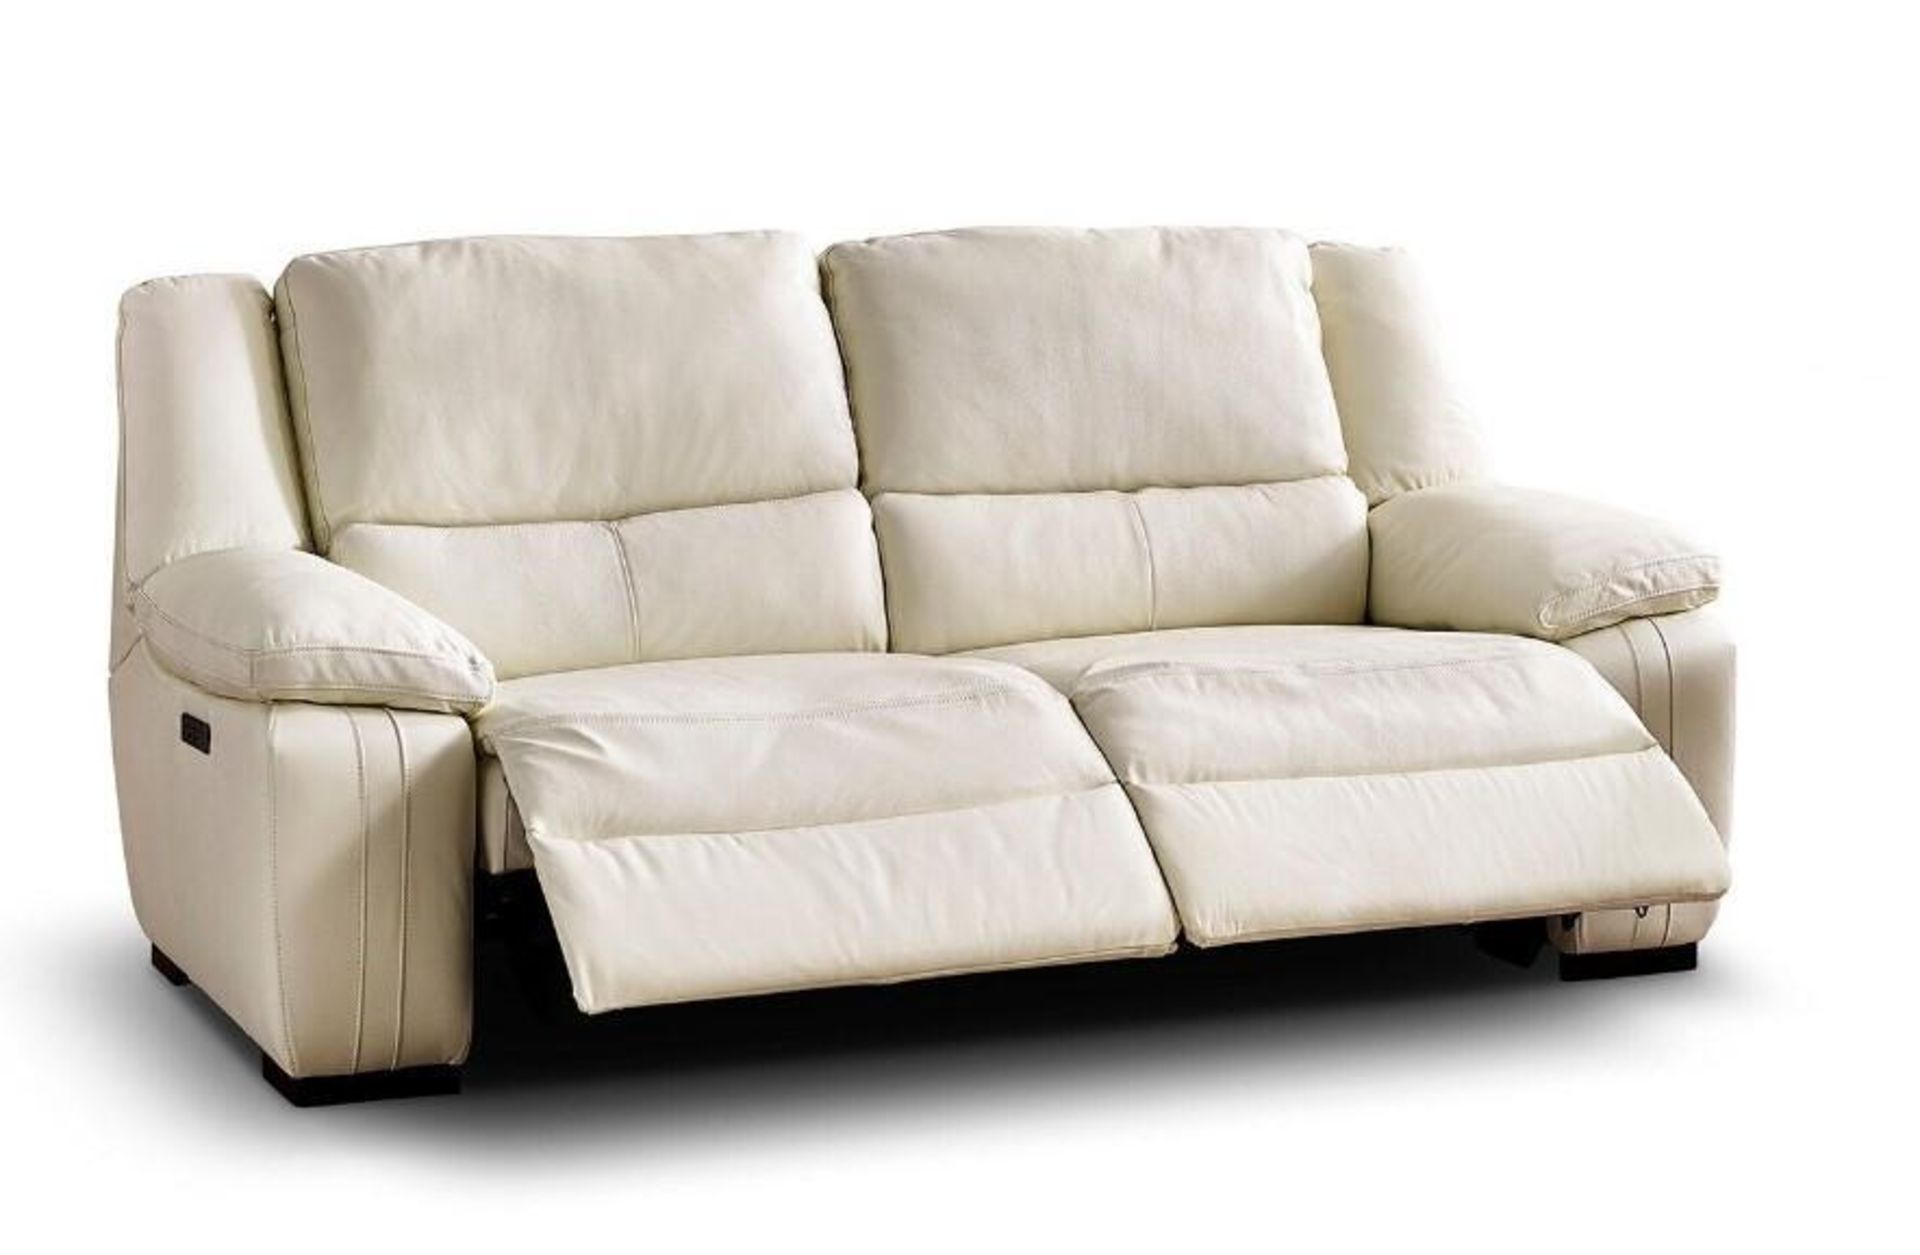 Brand new and boxed SCS Fallon 3 seater electric reclining sofa in Cream. - Bild 7 aus 7